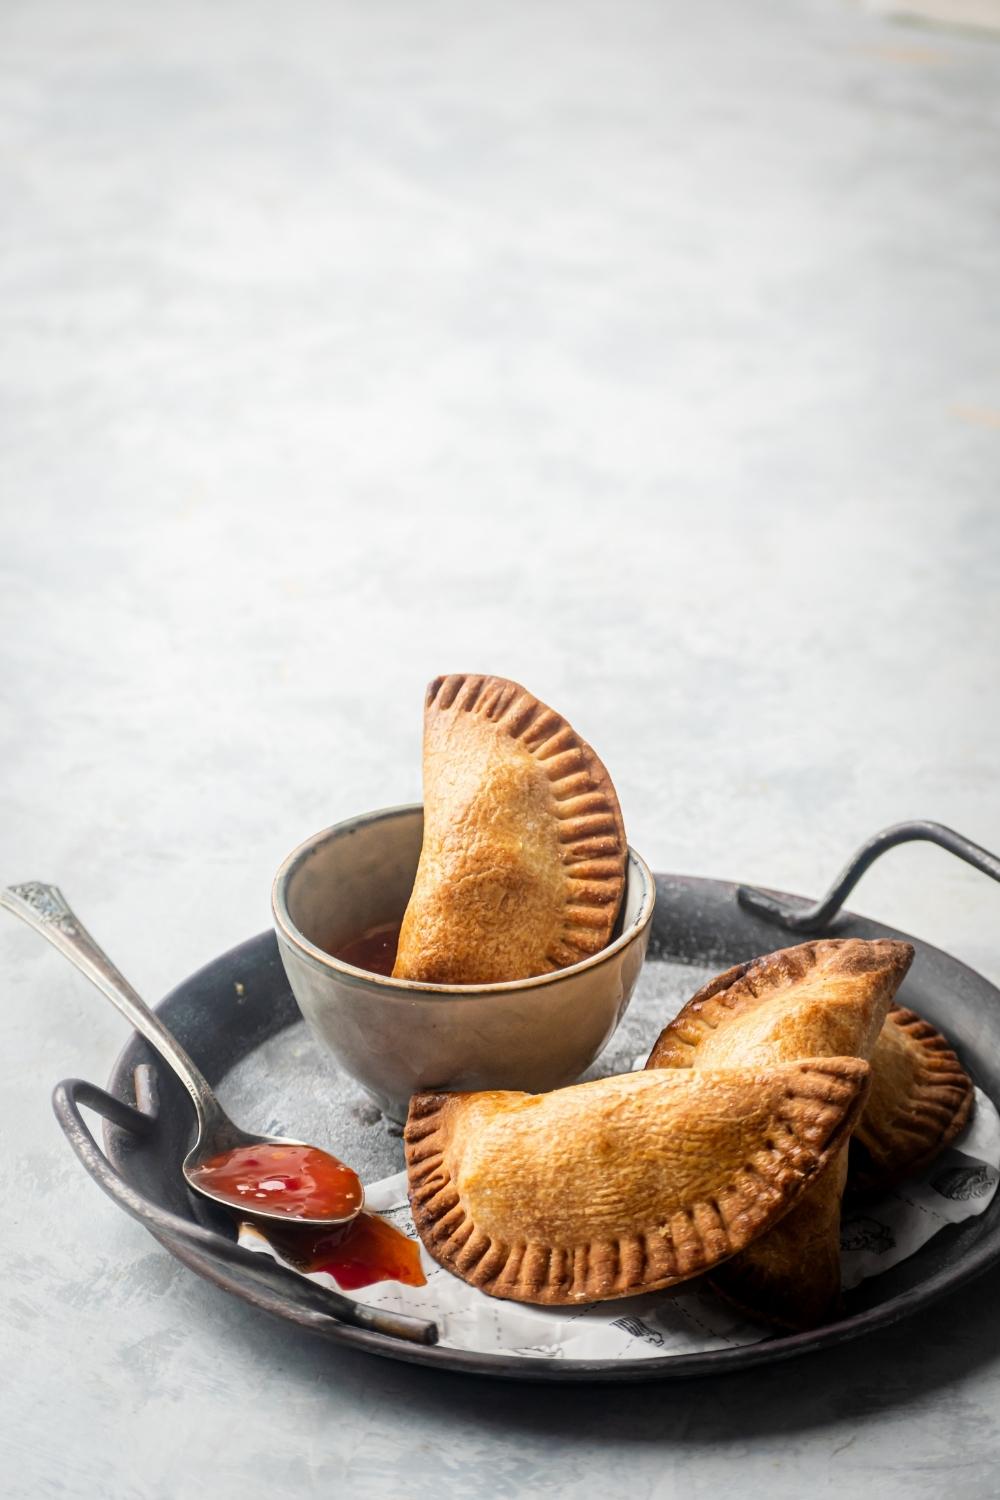 Gray pan with three chicken empanadas on top of one another and one chicken empanada submerged in a small bowl of sweet and sour sauce. There's a spoon on the pan with sweet-and-sour sauce on it and pants and a gray counter.